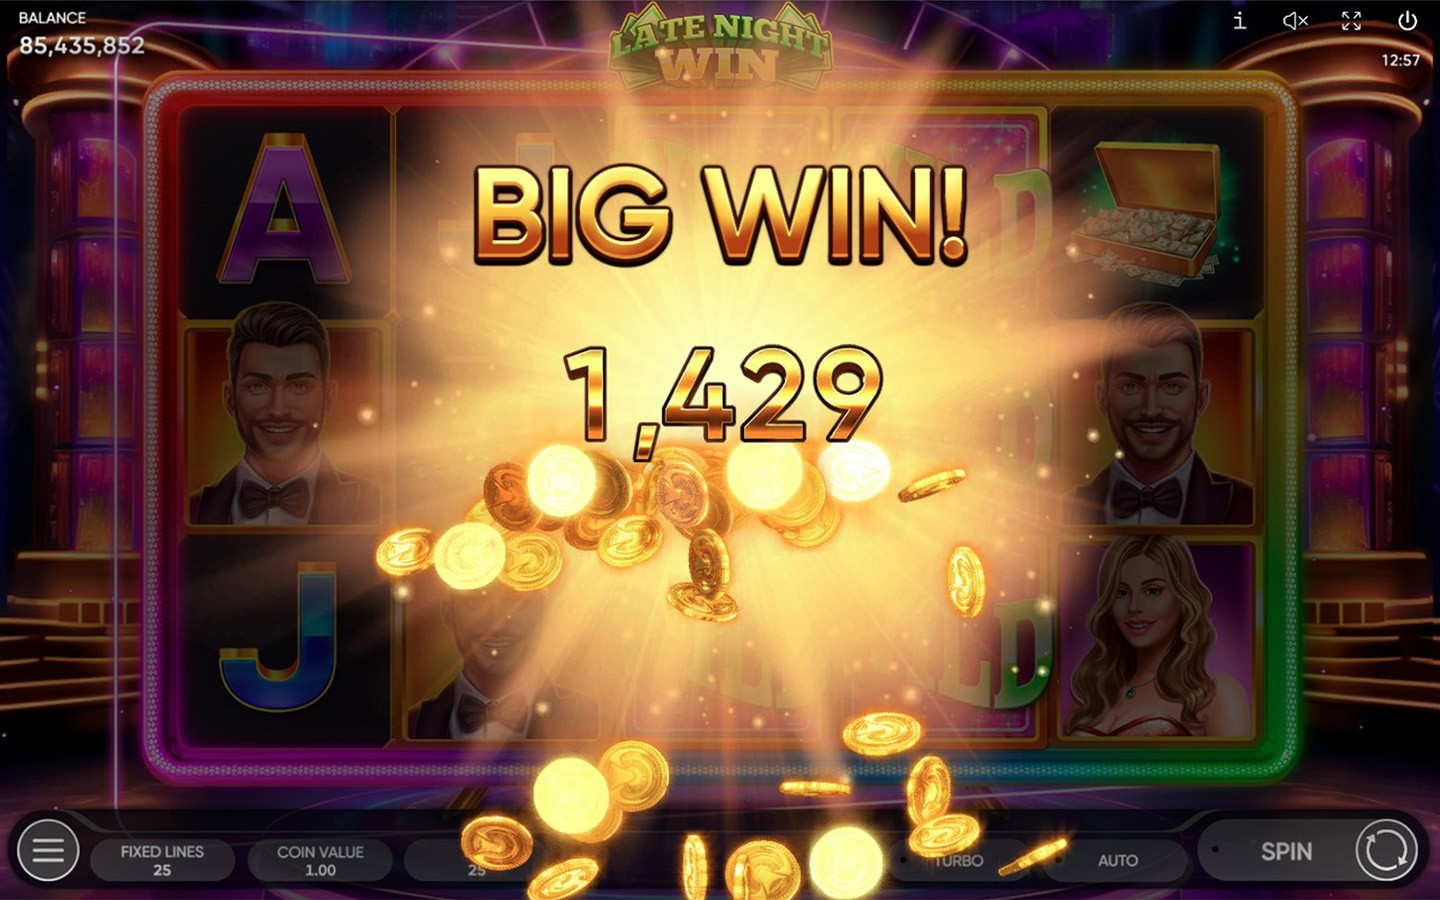 Late Night Win | NEW SLOT GAME IS OUT NOW!